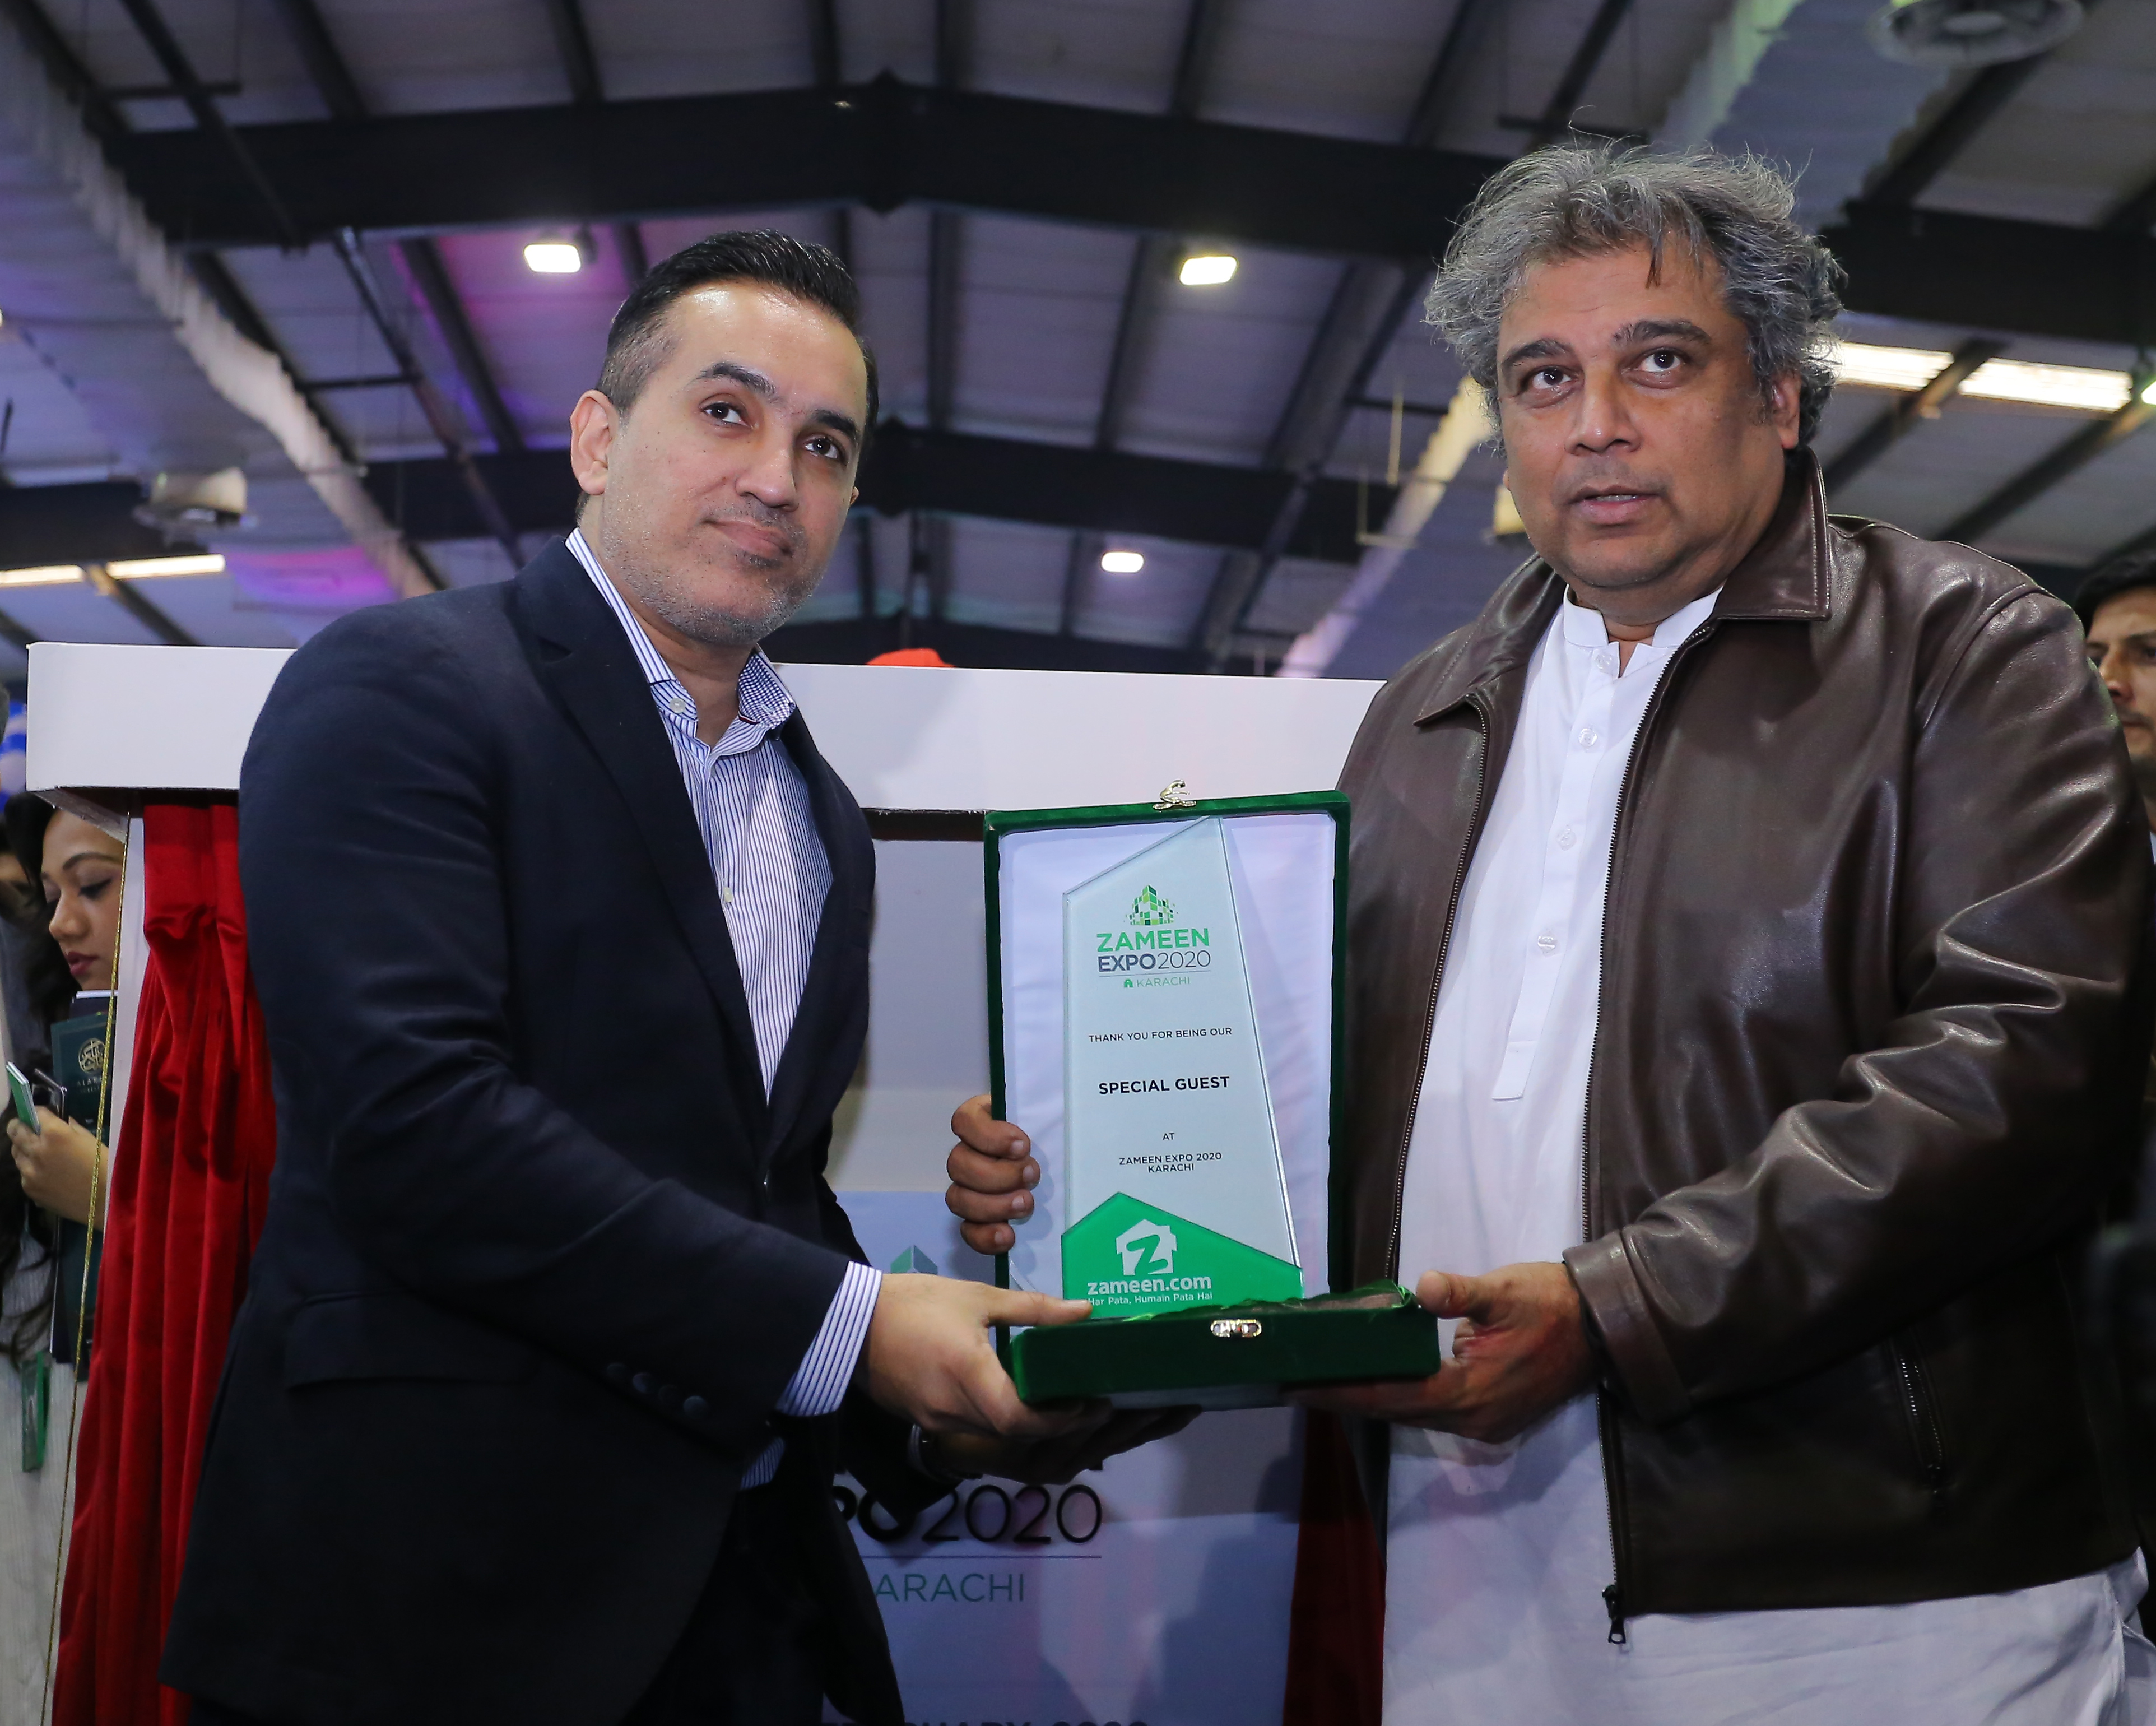 ‘Zameen Expo 2020 Karachi’ concludes successfully, attracts more than 90,000 visitors